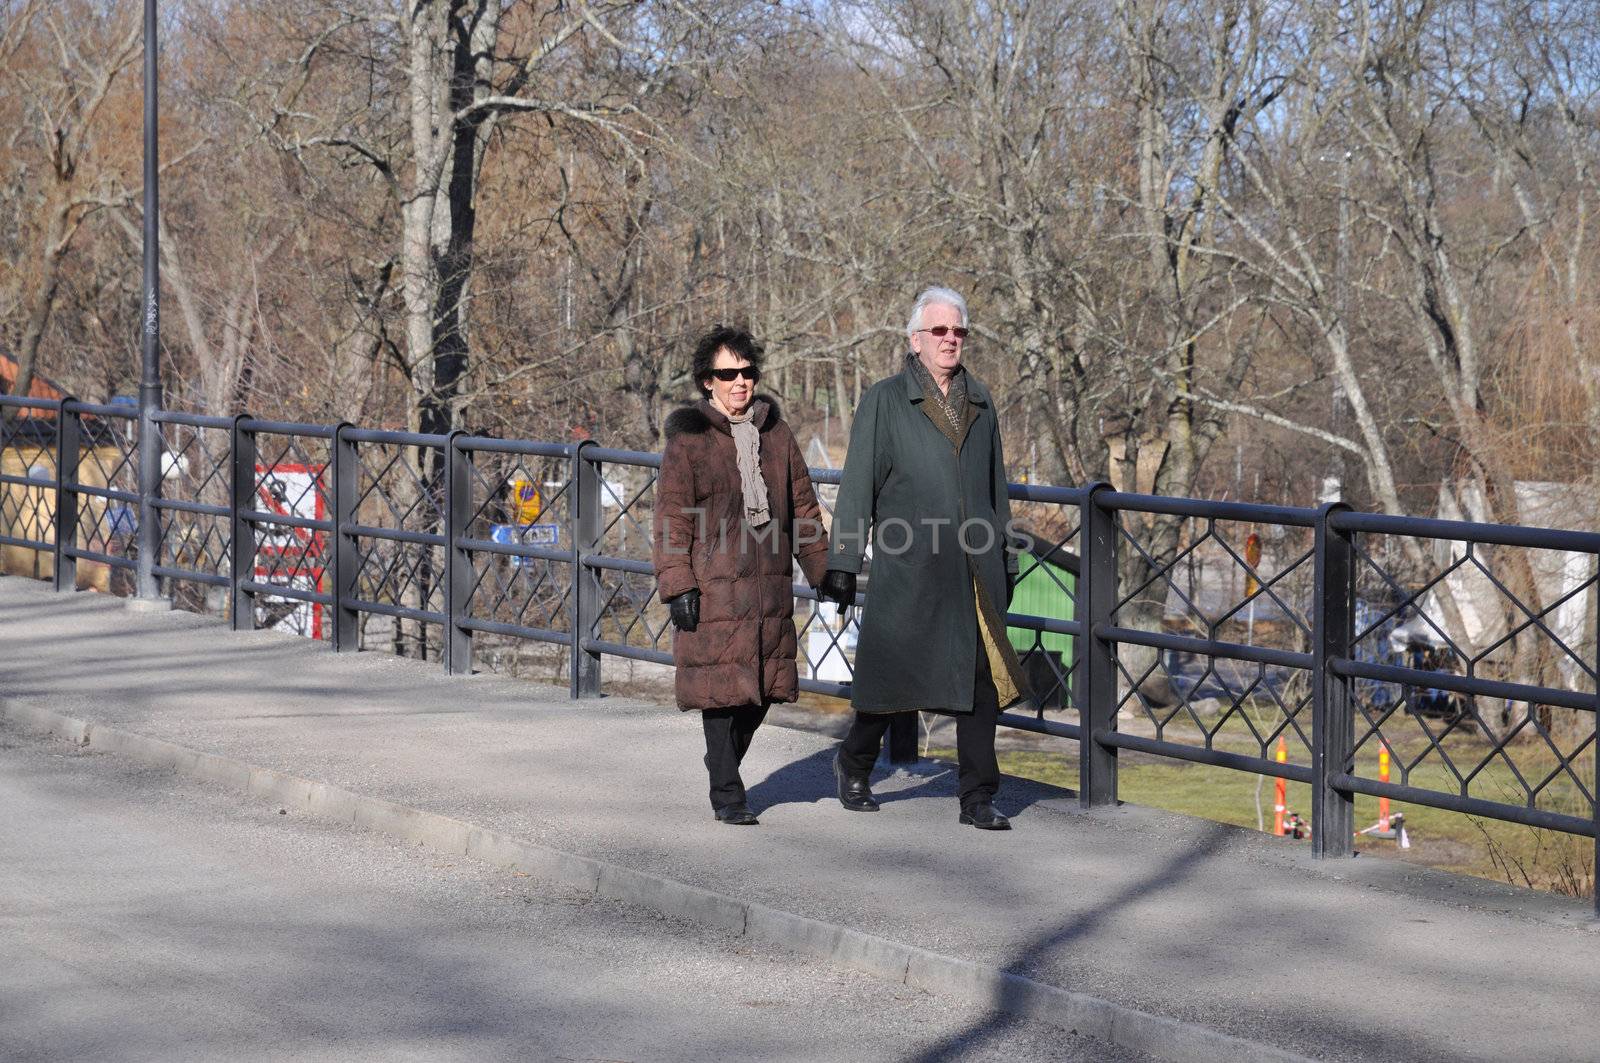 Older couple on a walk holding hands.